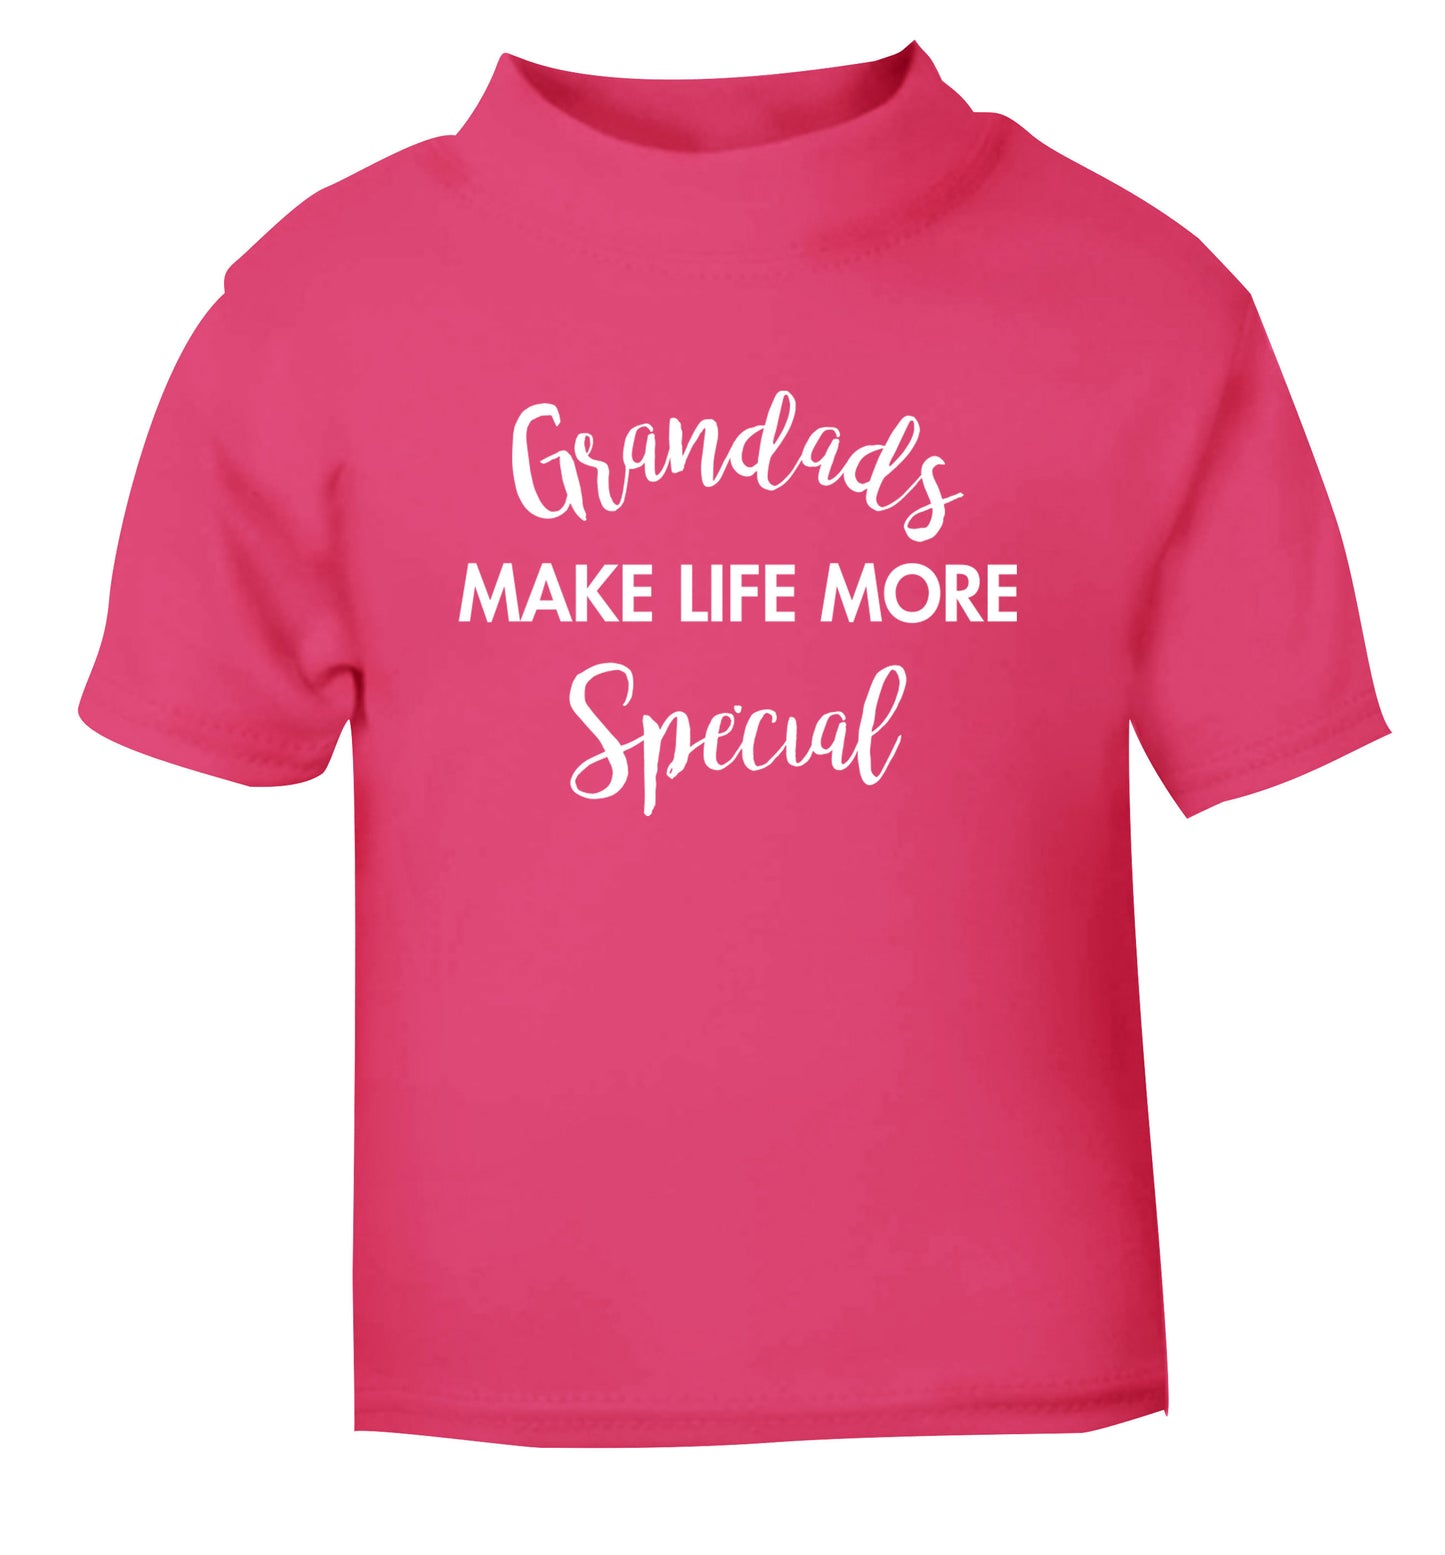 Grandads make life more special pink Baby Toddler Tshirt 2 Years